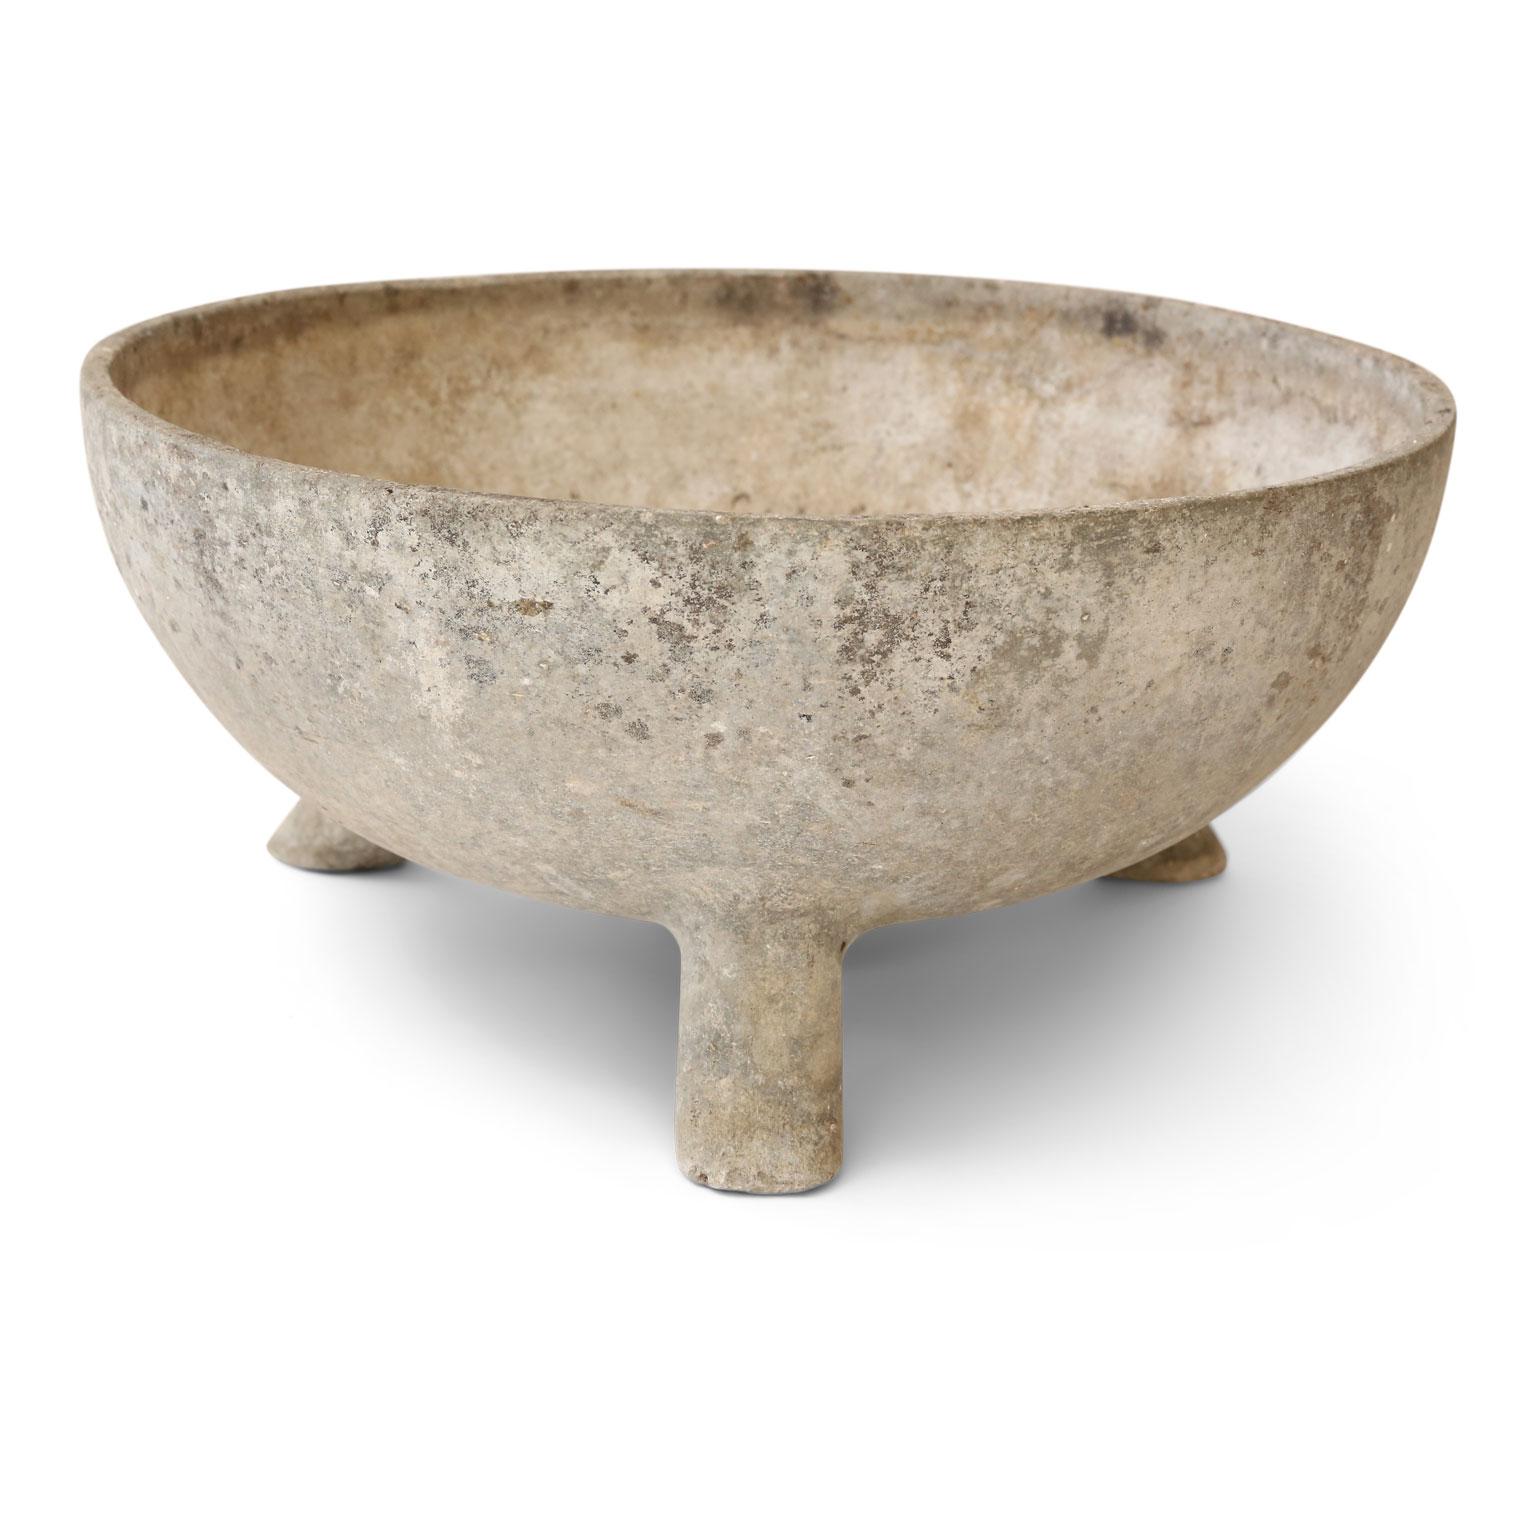 Willy Guhl planter cast in concrete, (1977). Bowl-shape raised upon three feet. Marked and dated. Two available and sold individually priced $1,570 each. (See last image and other listing: item ref LU984716644472).